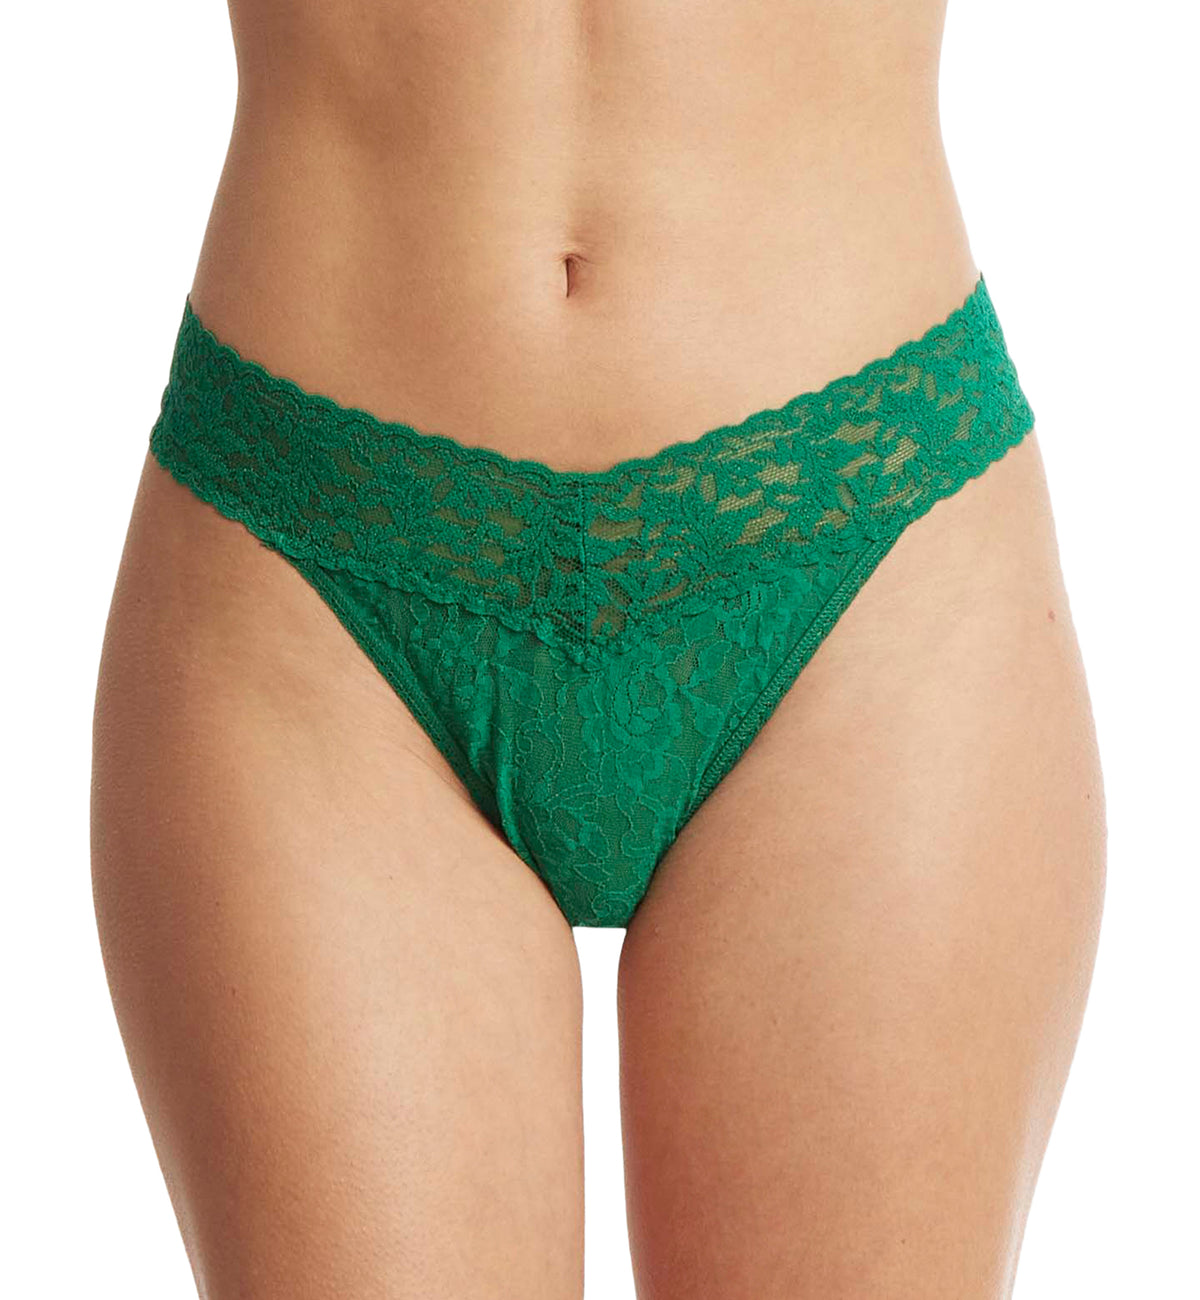 Hanky Panky Signature Lace Original Rise Thong (4811P),Green Envy - Green Envy,One Size